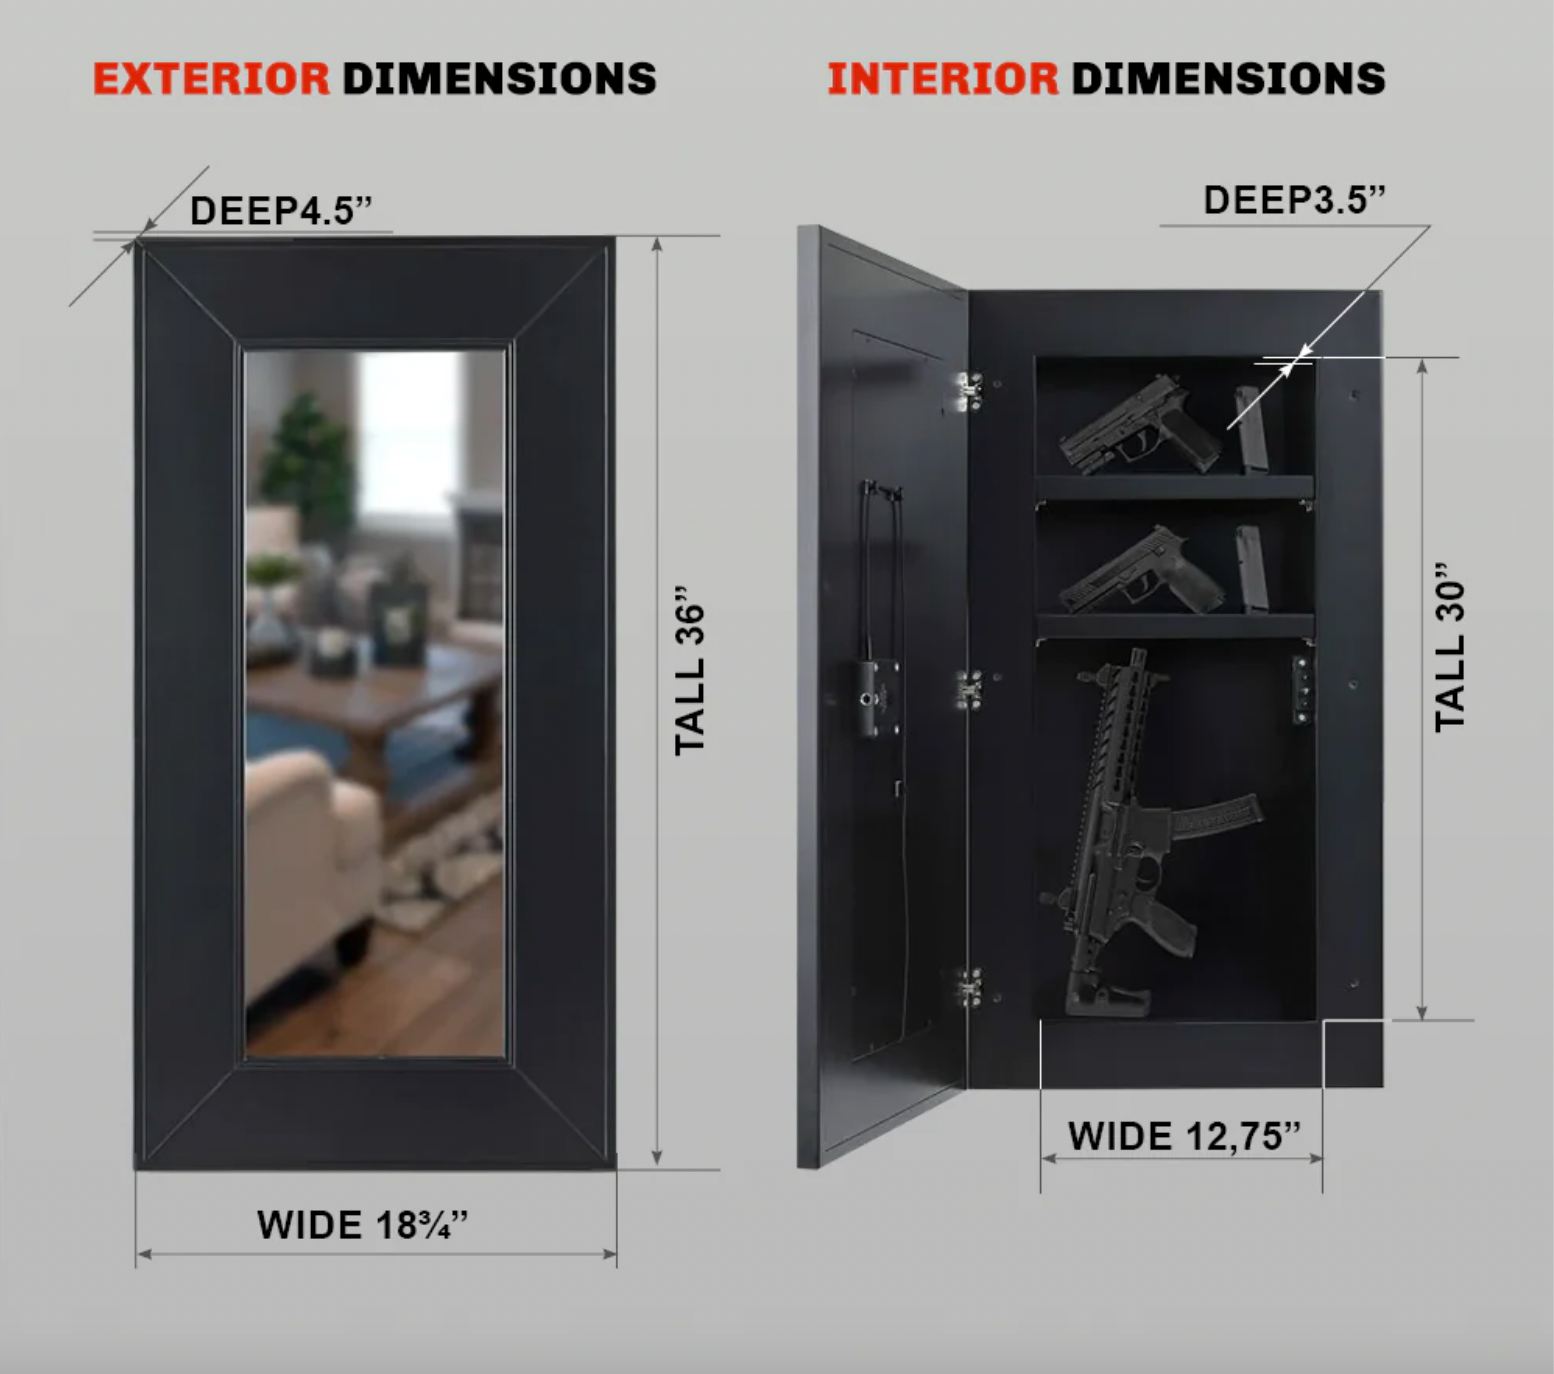 Bedroom Quick Access Gun Storage: Why Concealment Furniture is the Ideal Solution